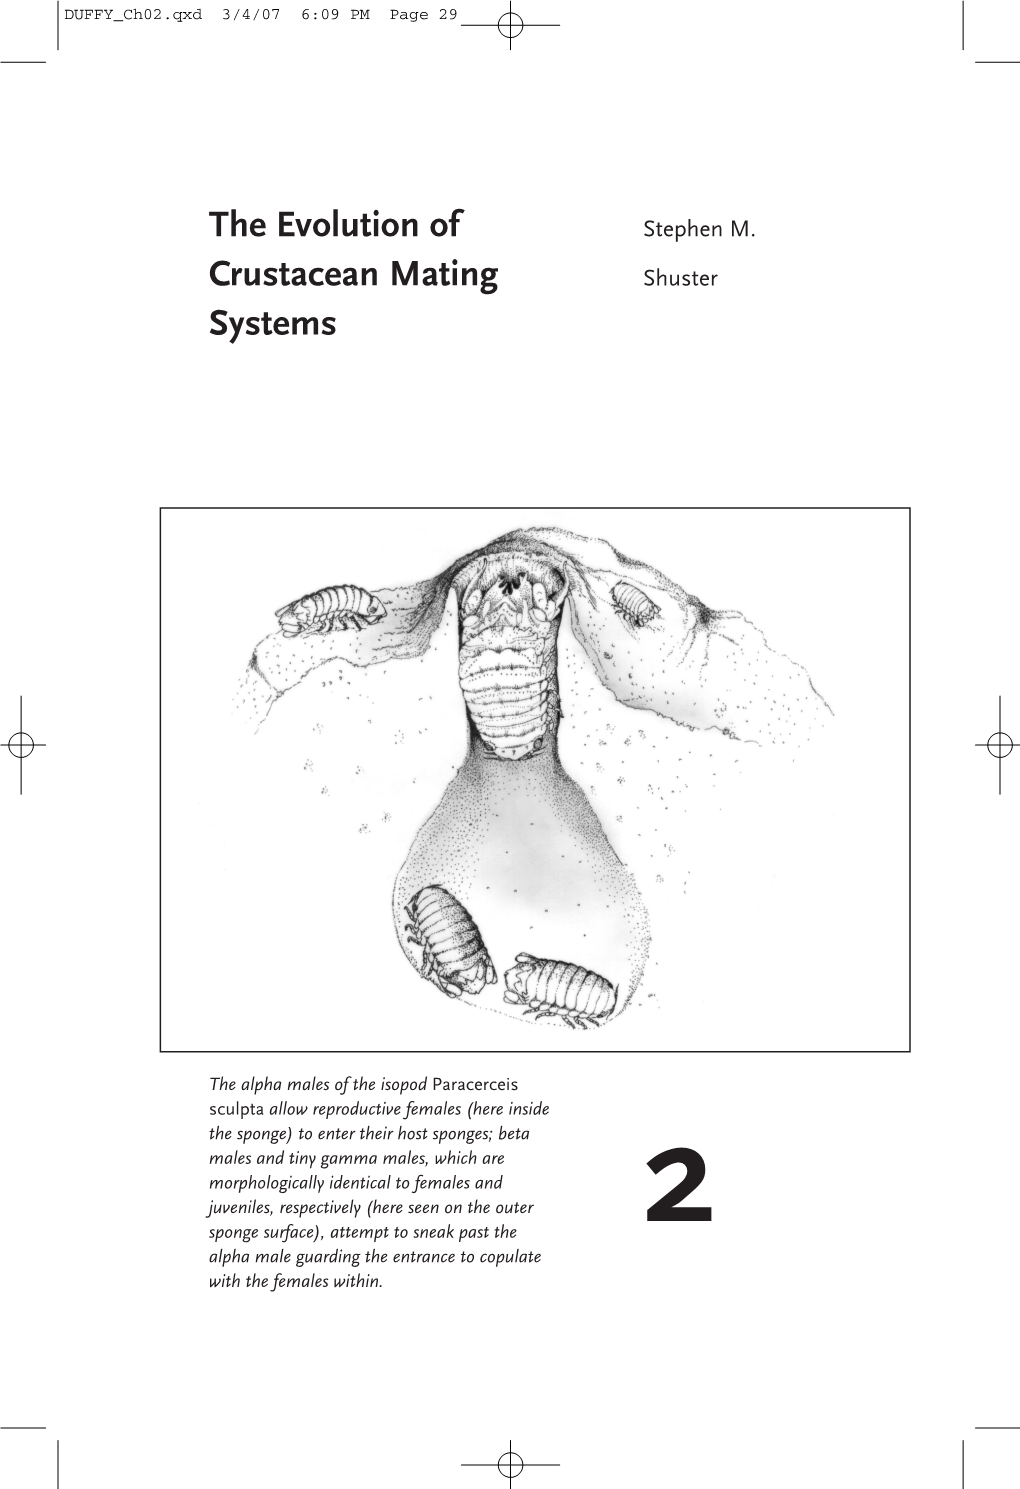 The Evolution of Crustacean Mating Systems 31